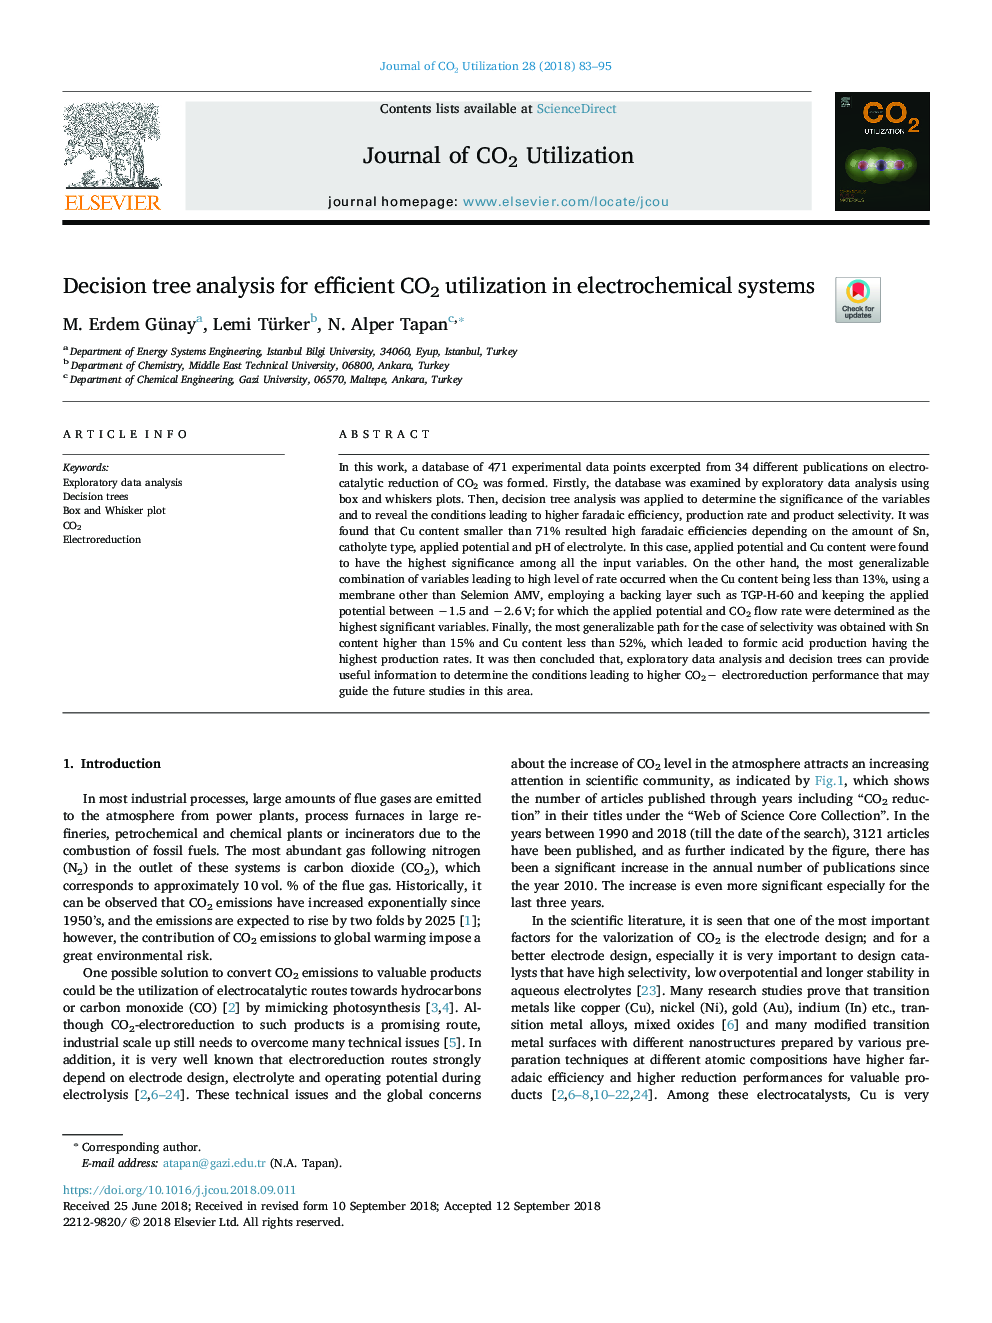 Decision tree analysis for efficient CO2 utilization in electrochemical systems